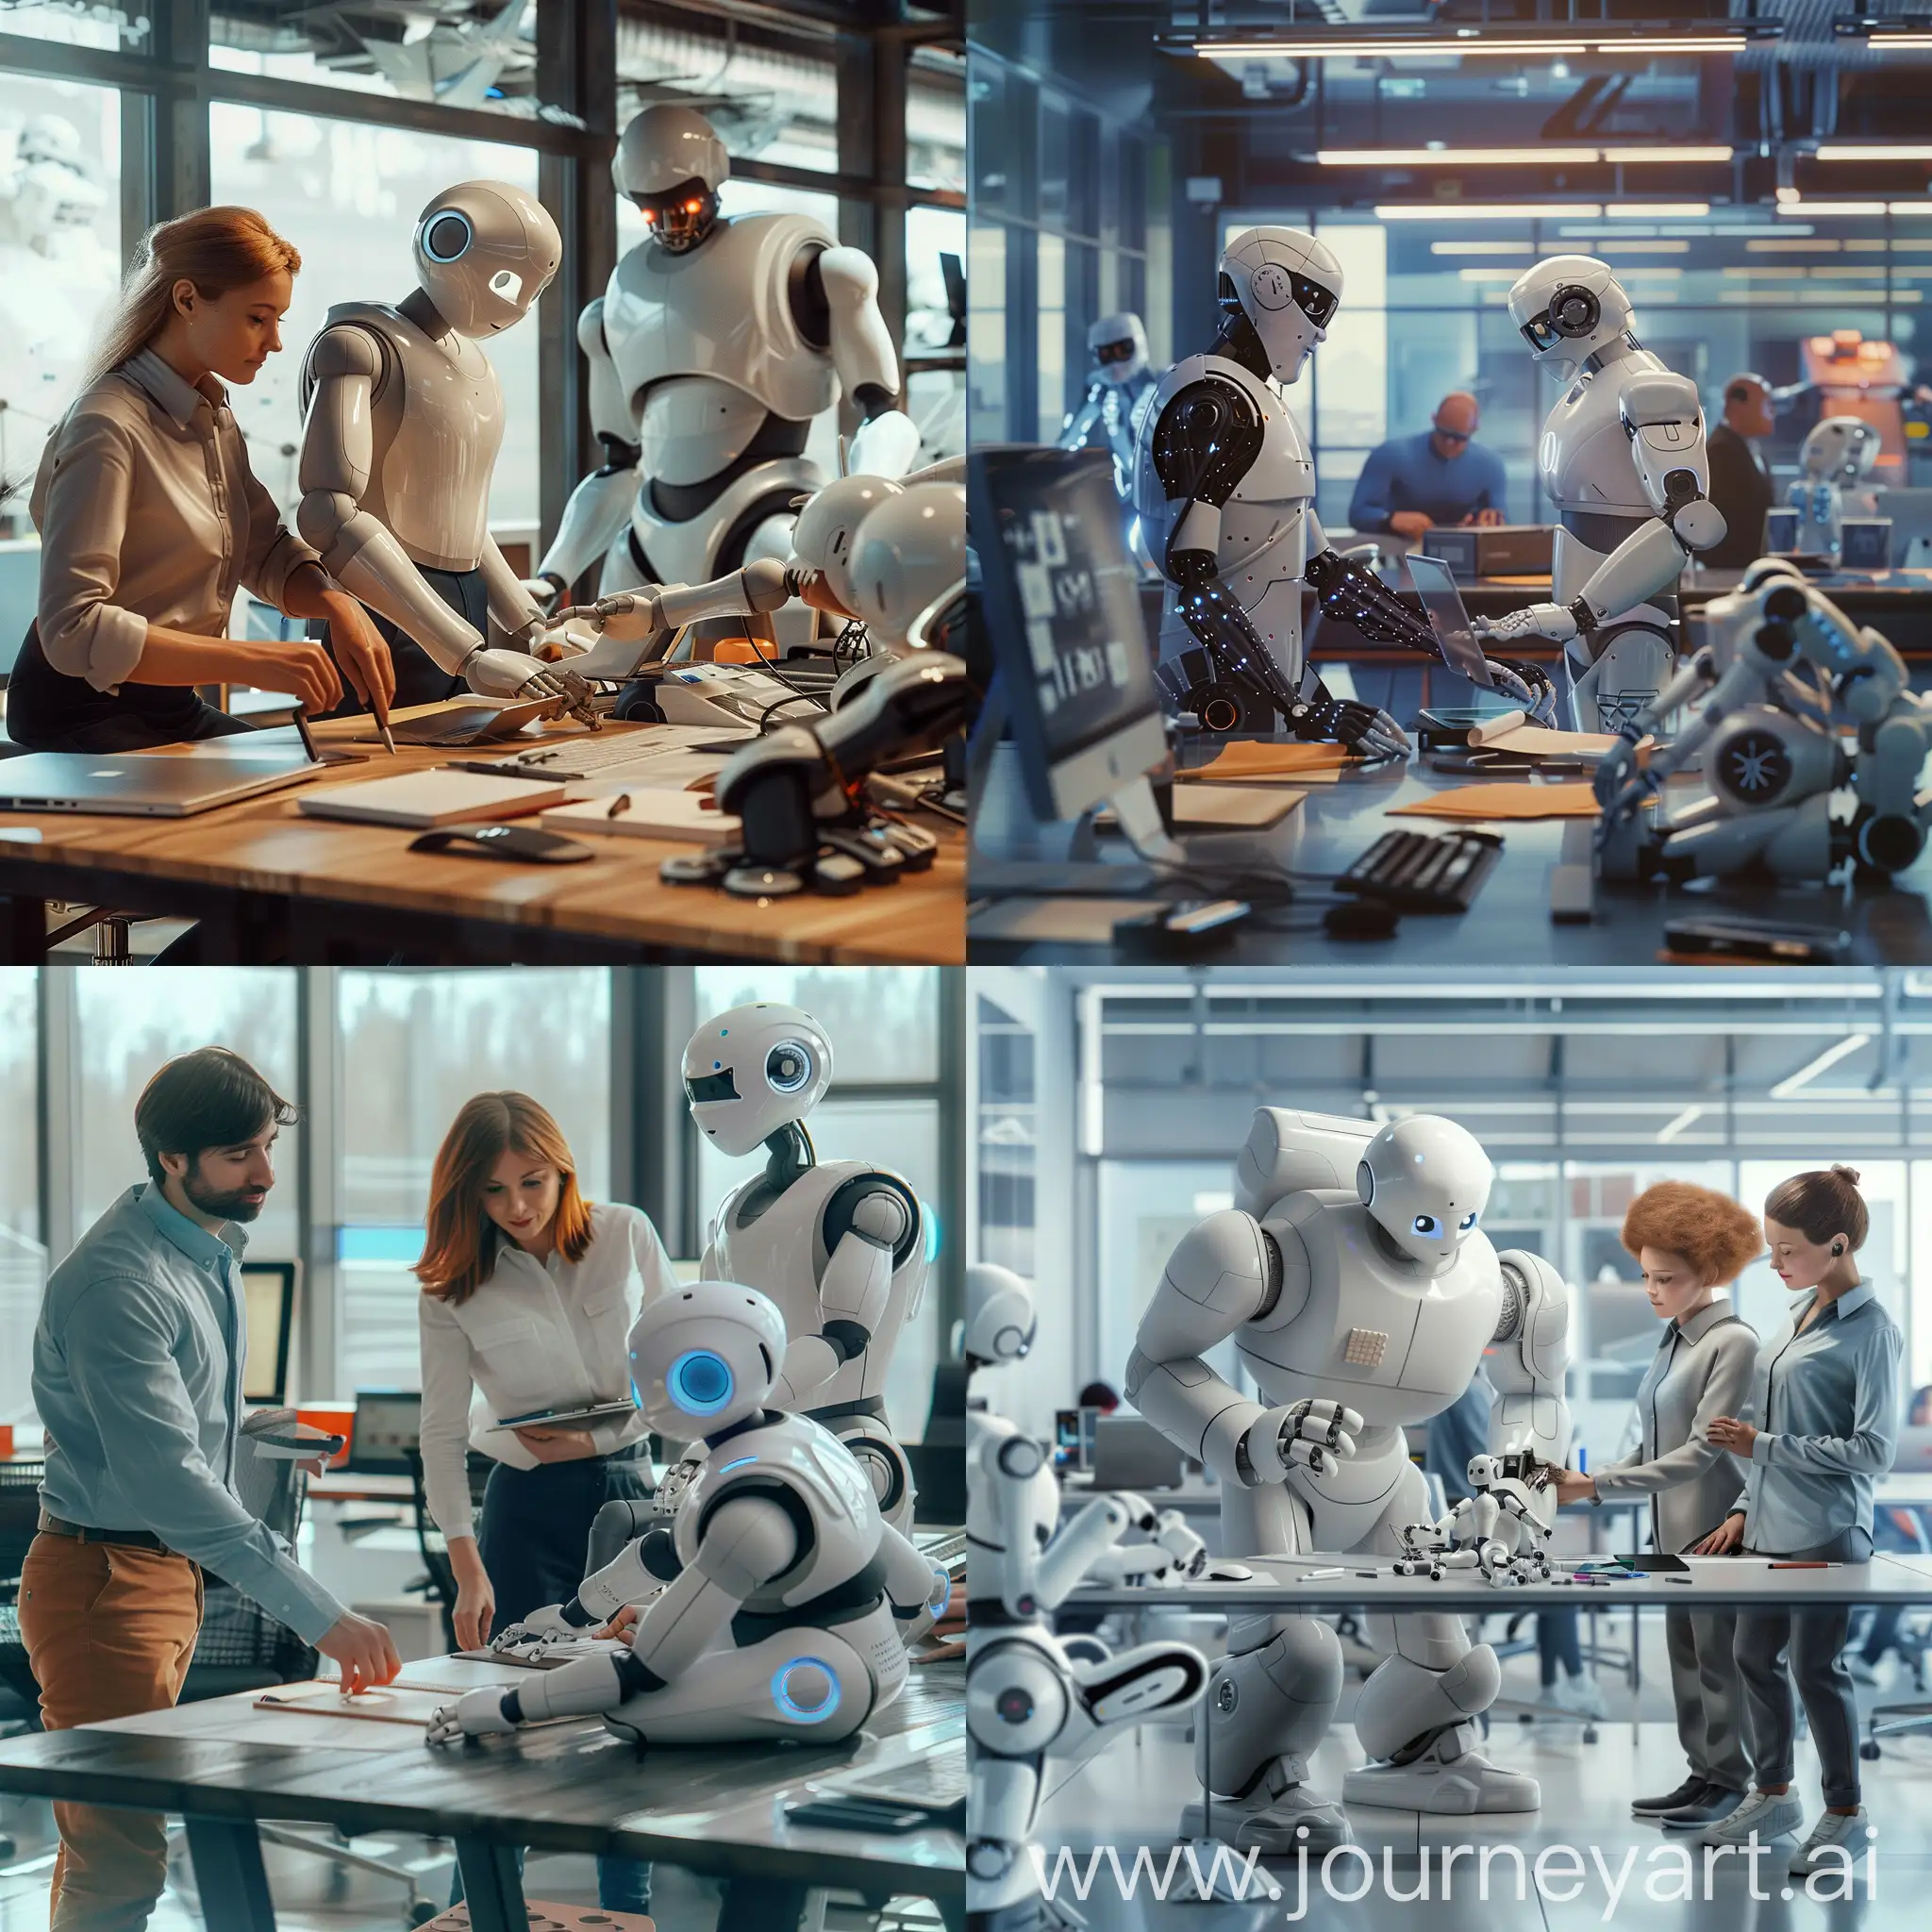 Tech-Founders-Collaborate-with-Robots-in-Futuristic-Office